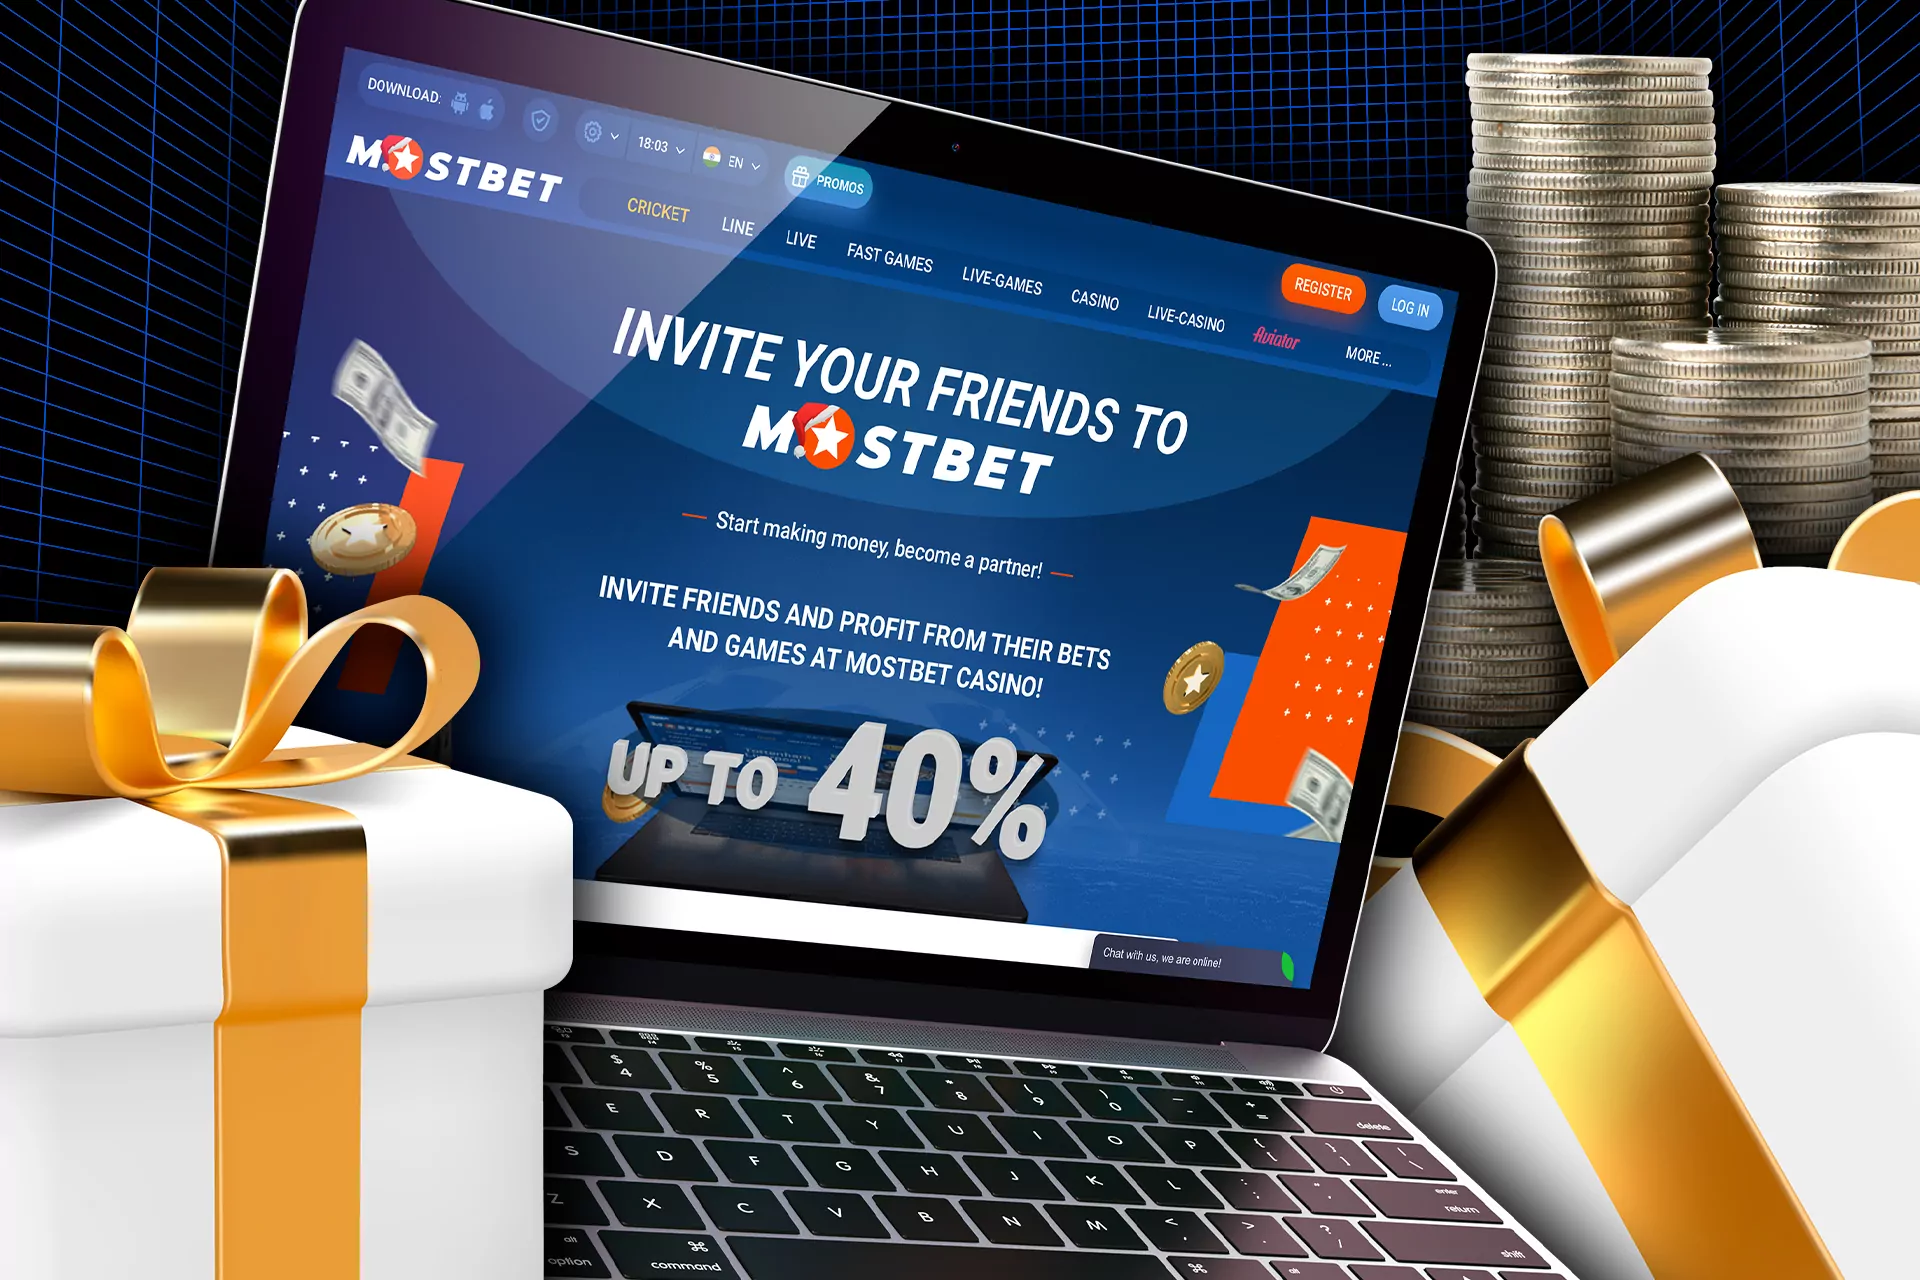 You can also take part in the Mostbet referral program and get a bonus of attracting your friends.